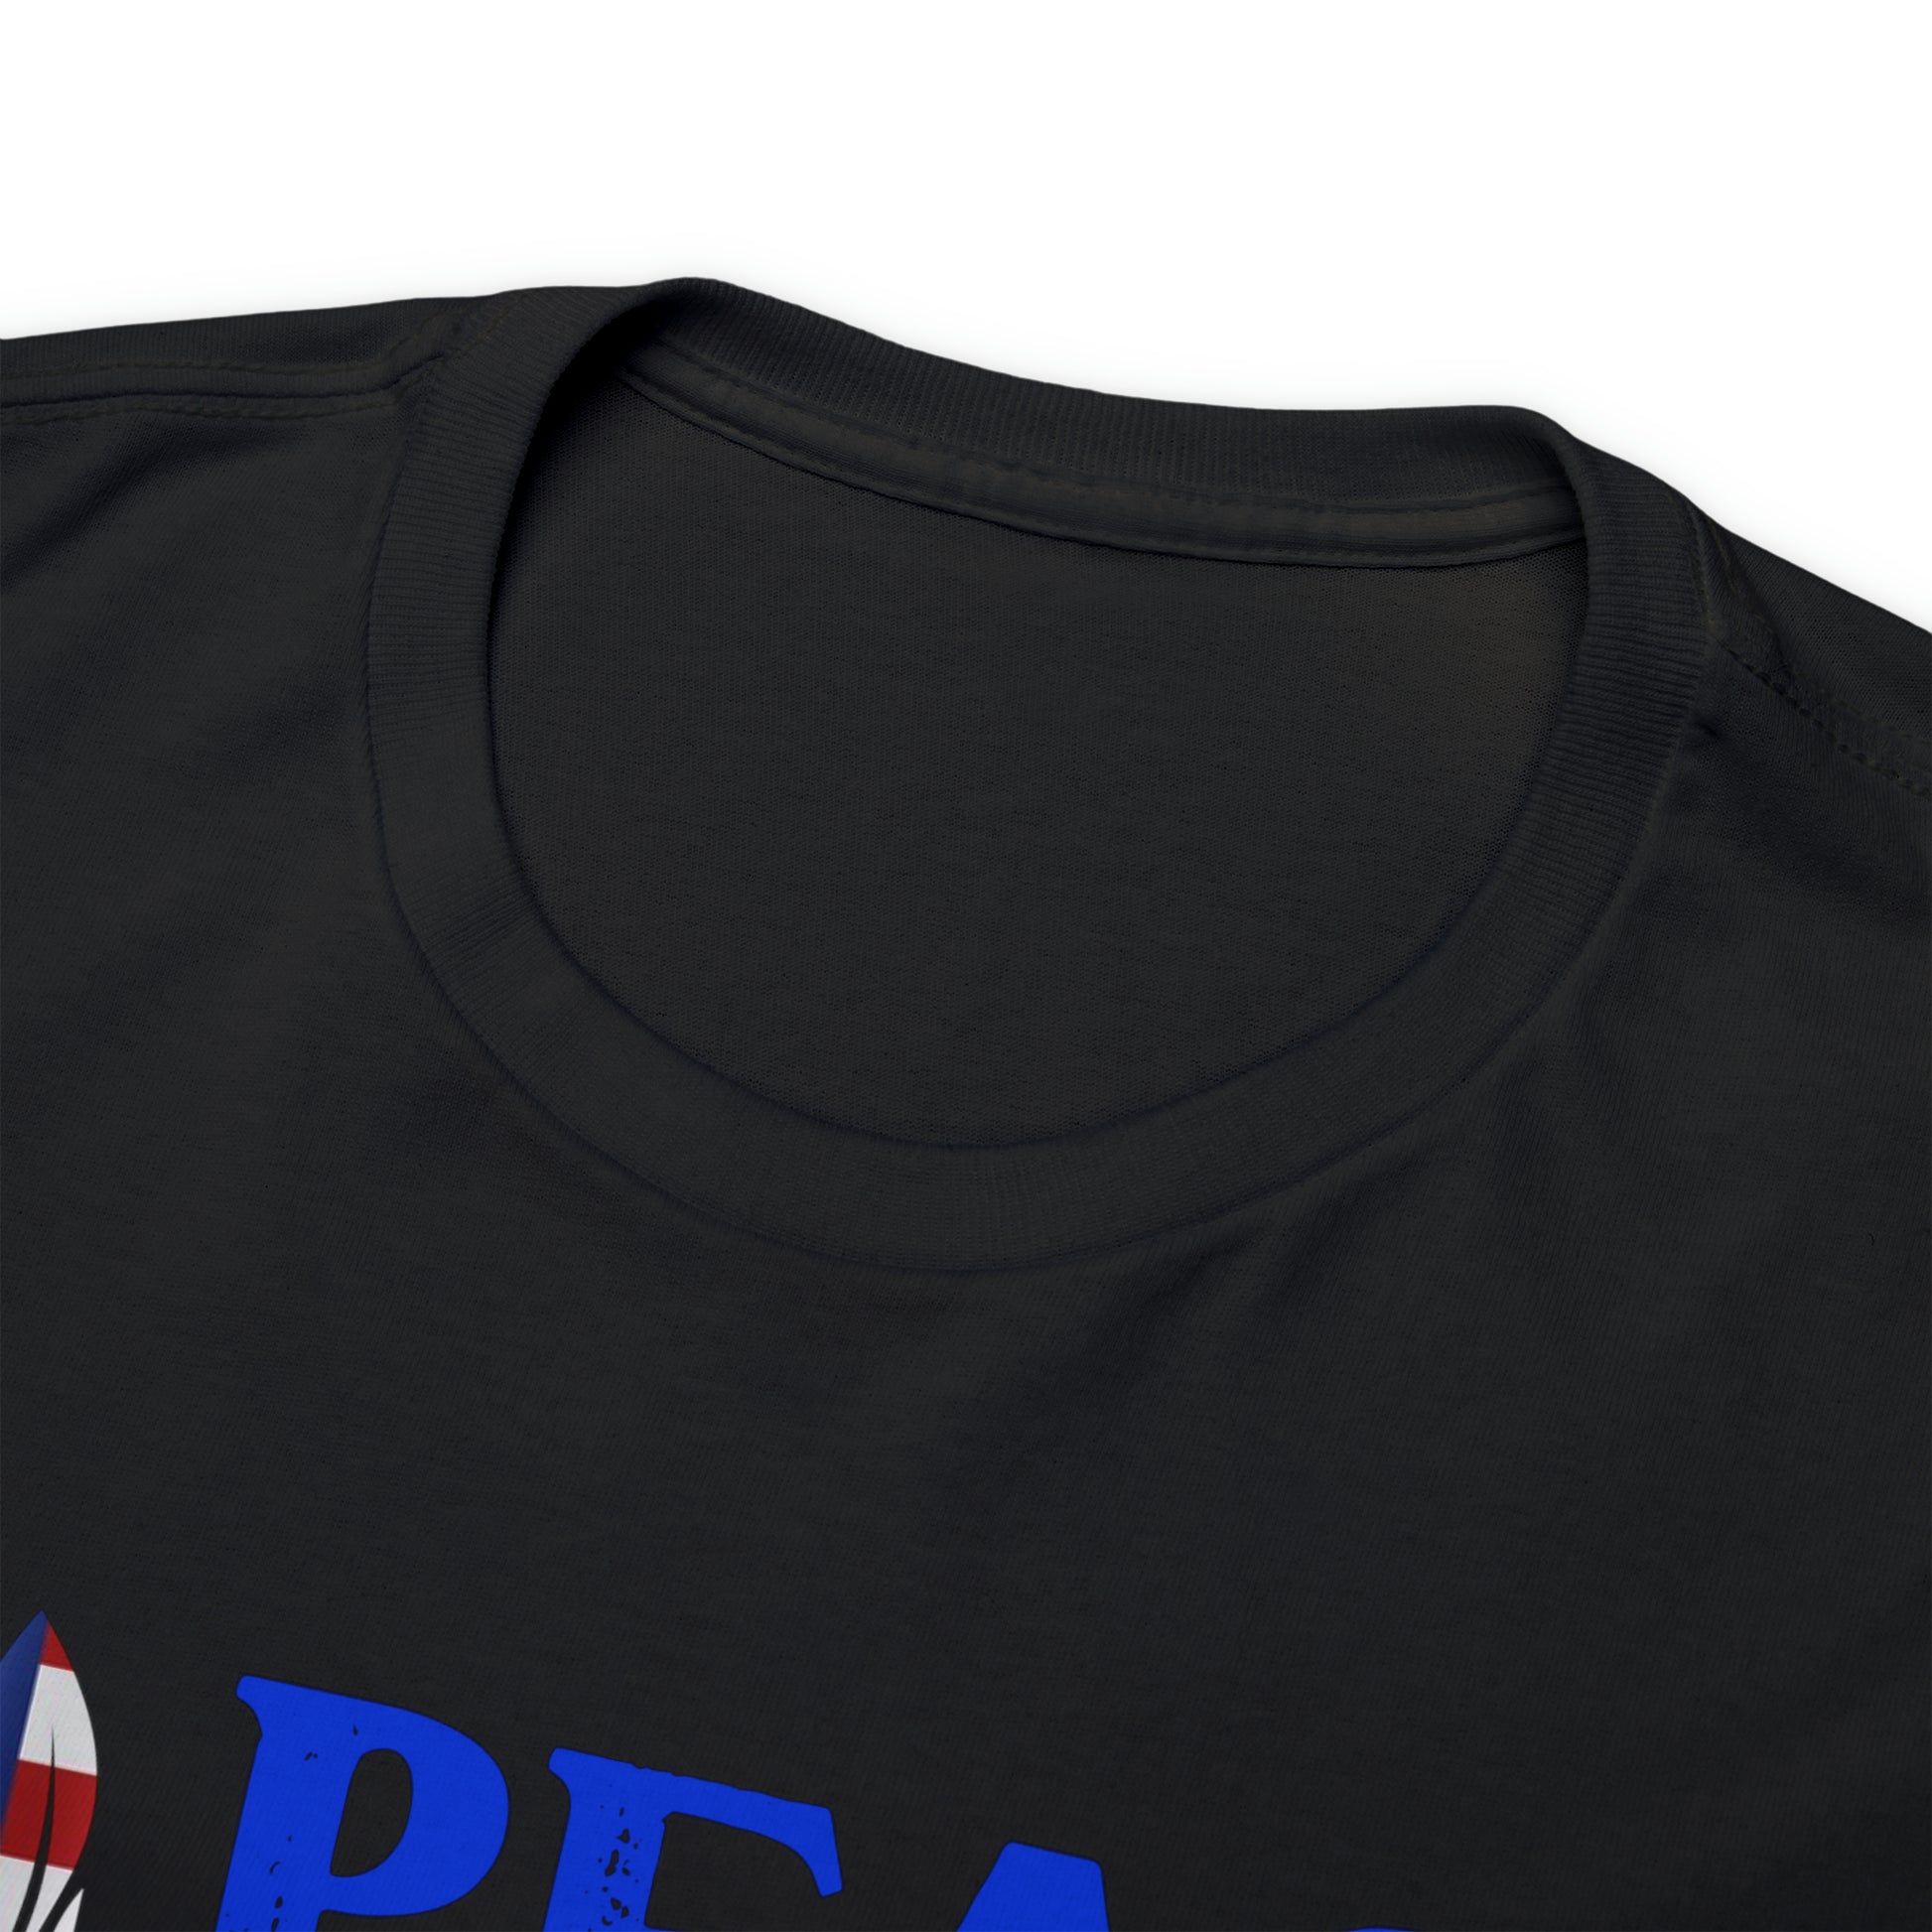 "Peace, Love, America" T-Shirt - Weave Got Gifts - Unique Gifts You Won’t Find Anywhere Else!